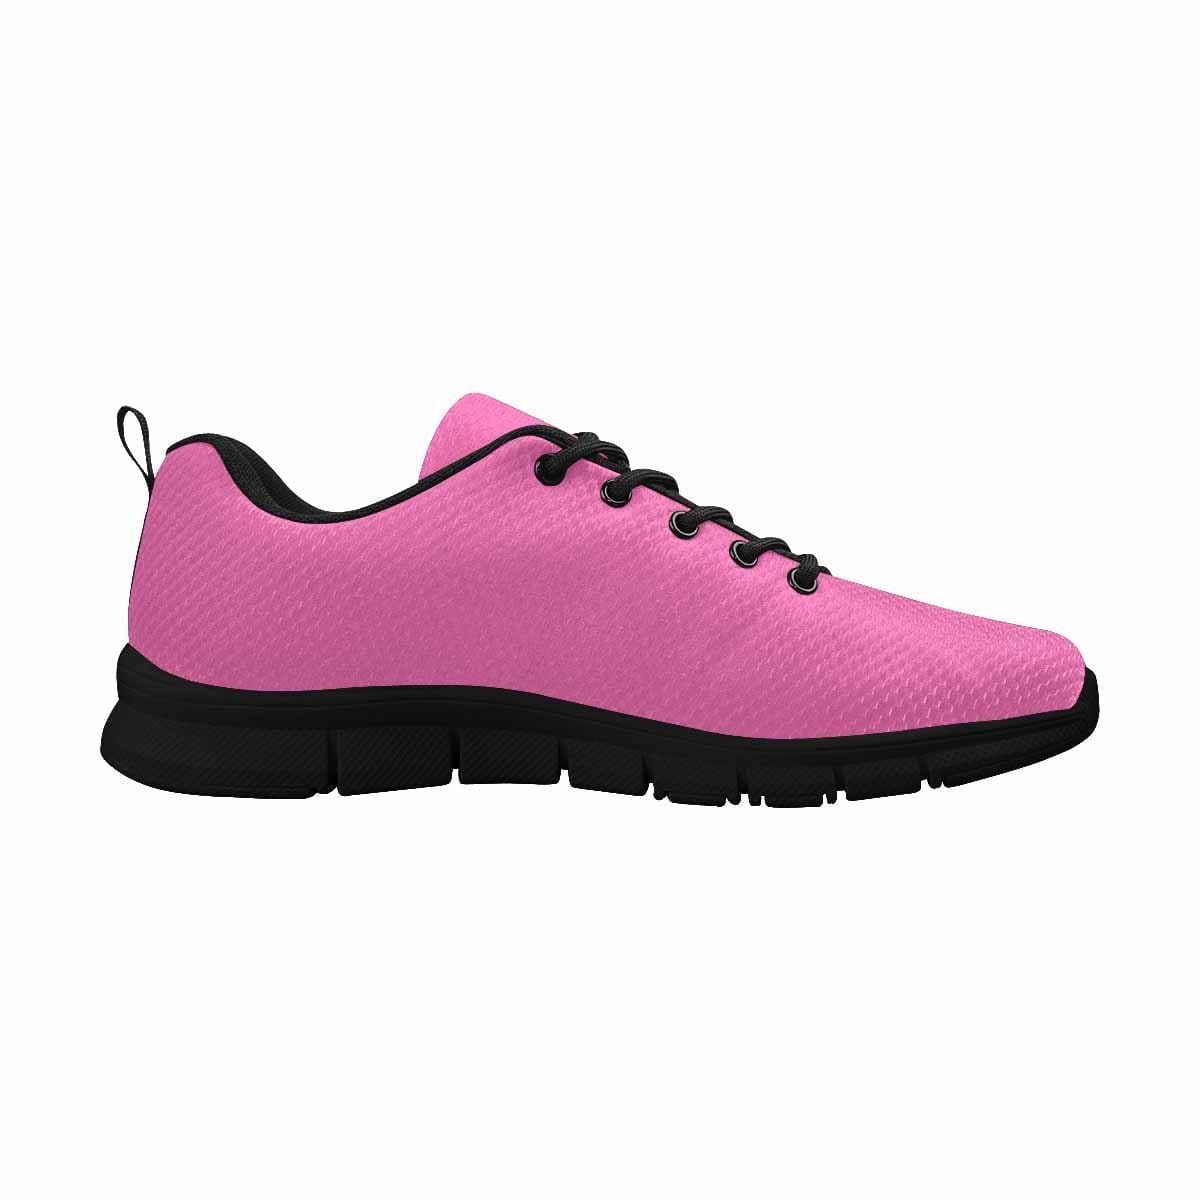 Sneakers For Men Pink And Black - Canvas Mesh Athletic Running Shoes - Mens